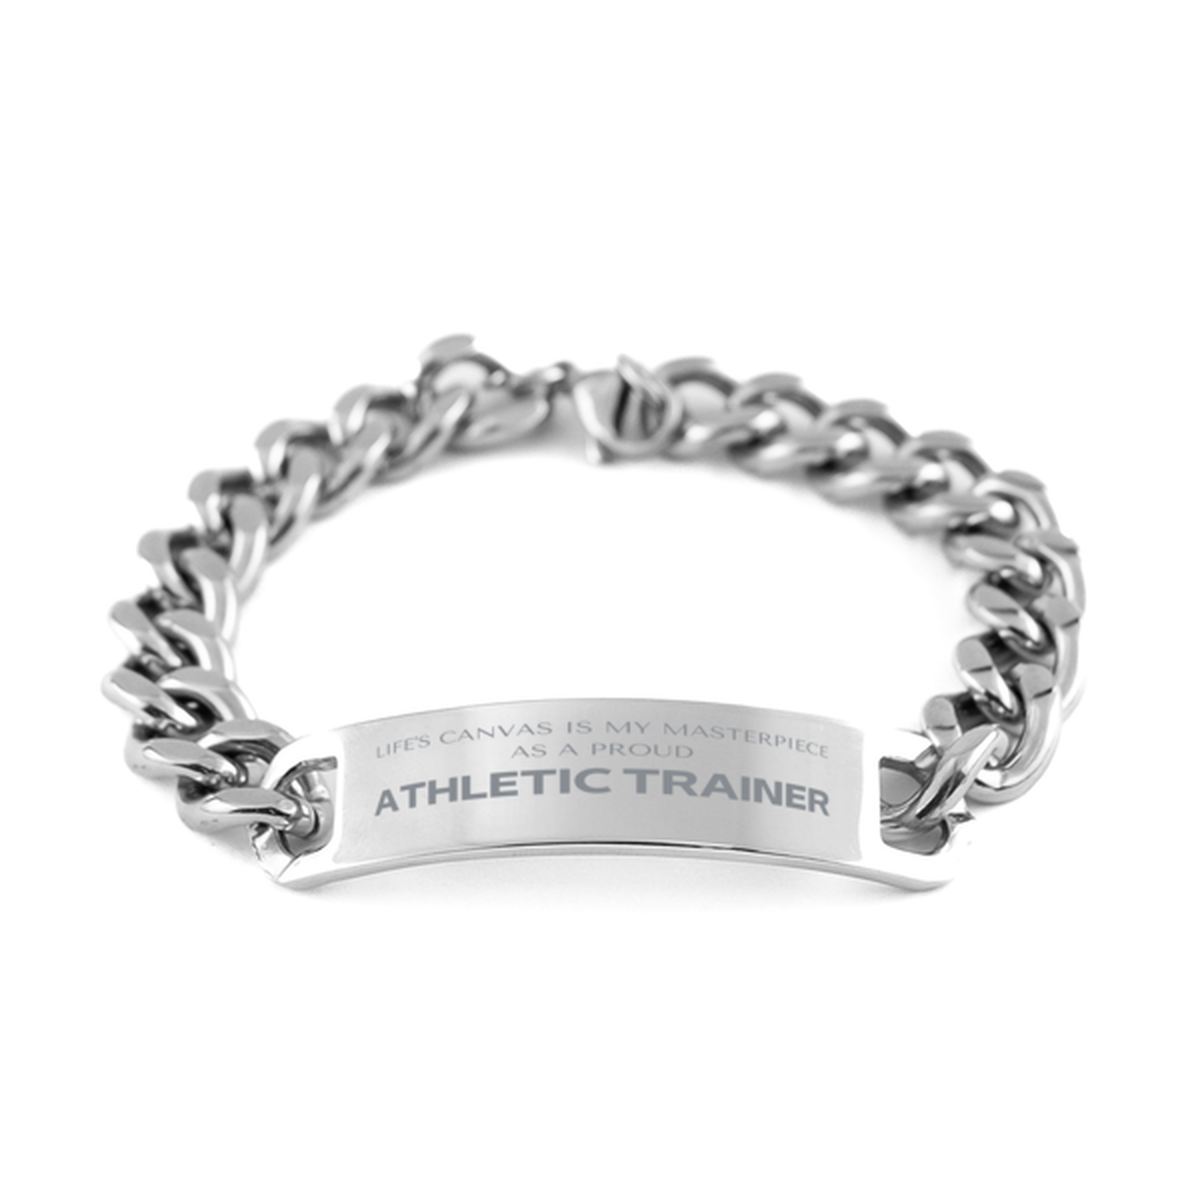 Proud Athletic Trainer Gifts, Life's canvas is my masterpiece, Epic Birthday Christmas Unique Cuban Chain Stainless Steel Bracelet For Athletic Trainer, Coworkers, Men, Women, Friends